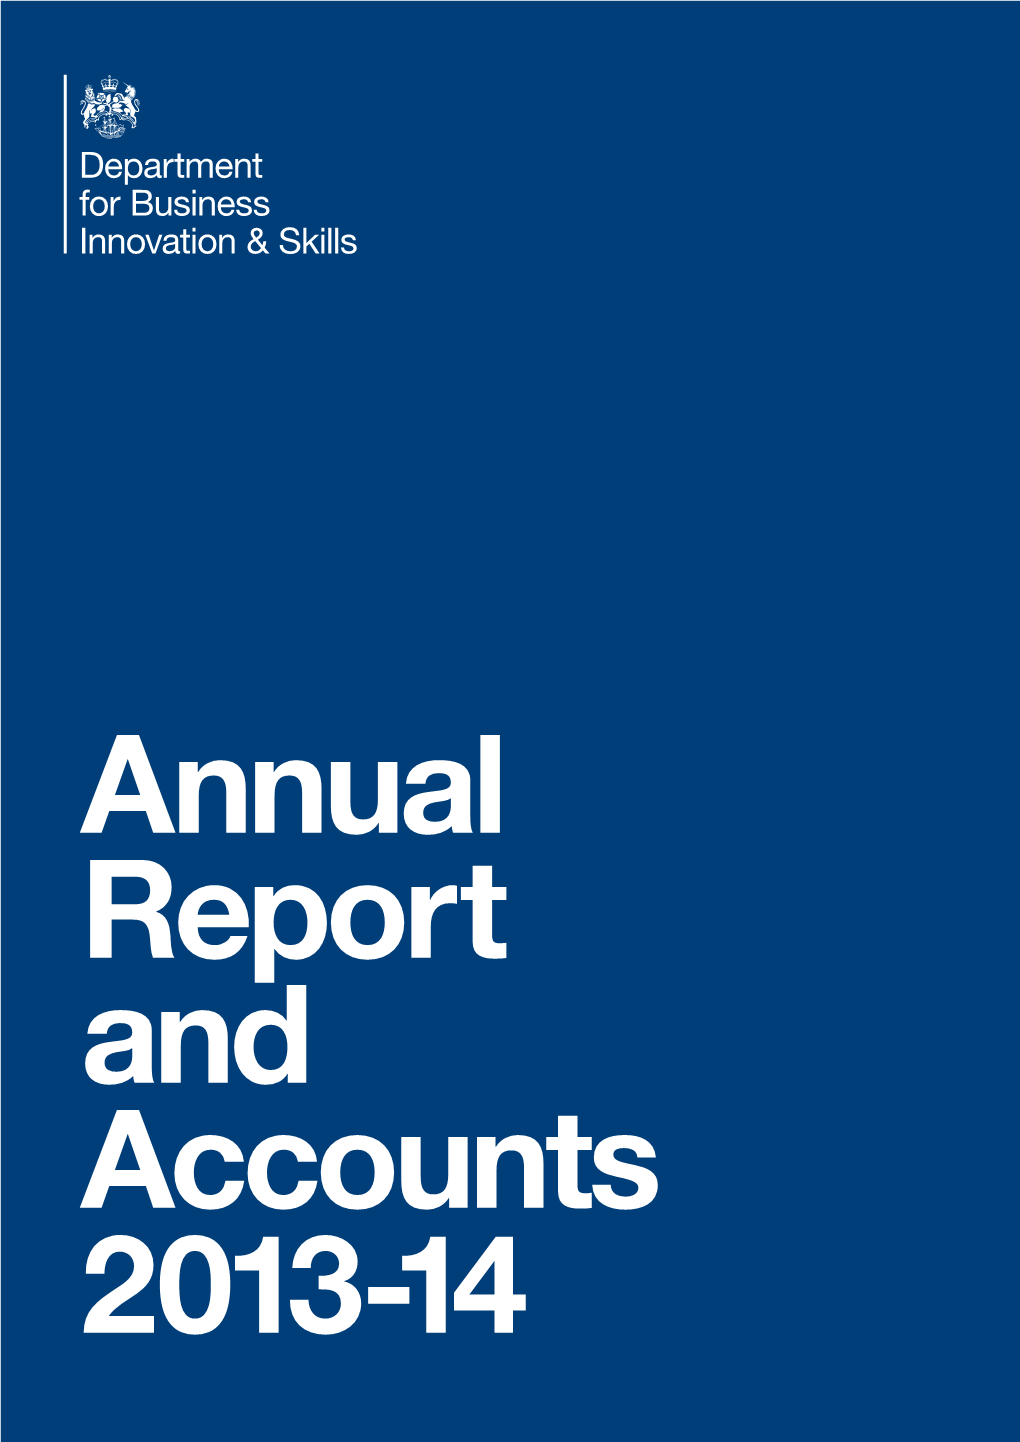 BIS Annual Report and Accounts 2013